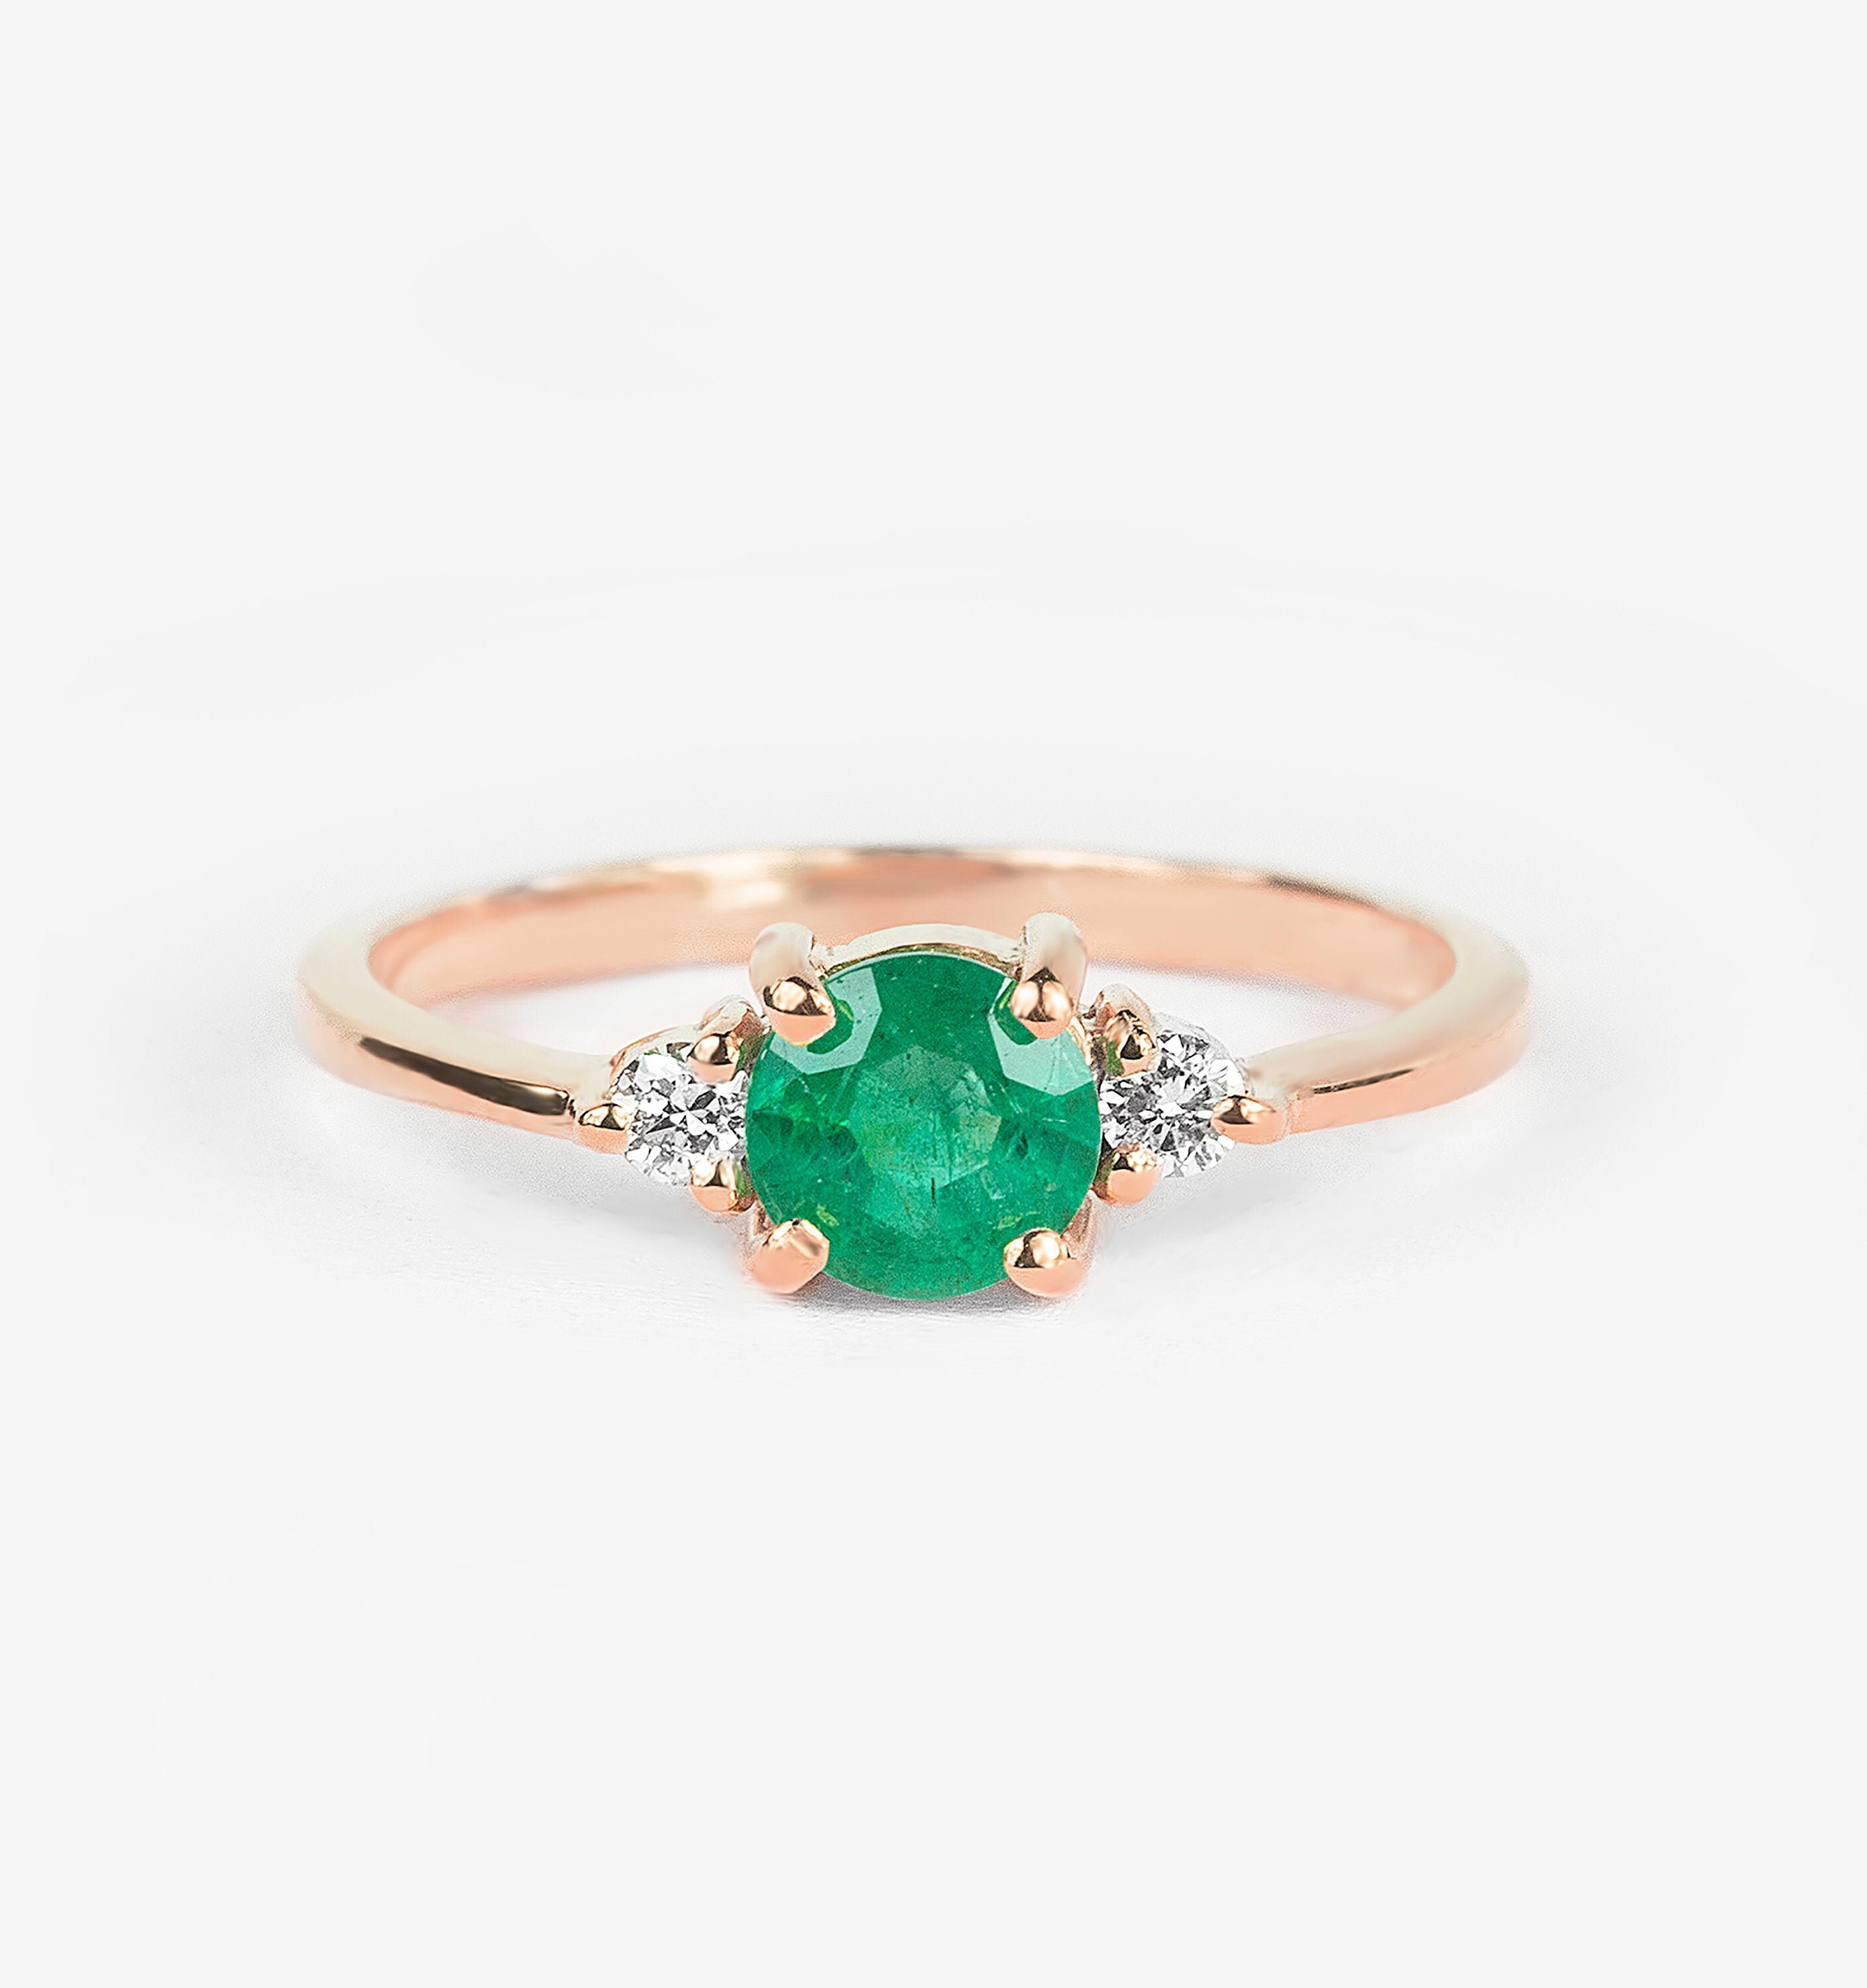 Emerald Engagement Ring, Emerald Rose Gold Engagement Ring-Three Stone Ring-Promise Ring-Anniversary Ring-Emerald Ring